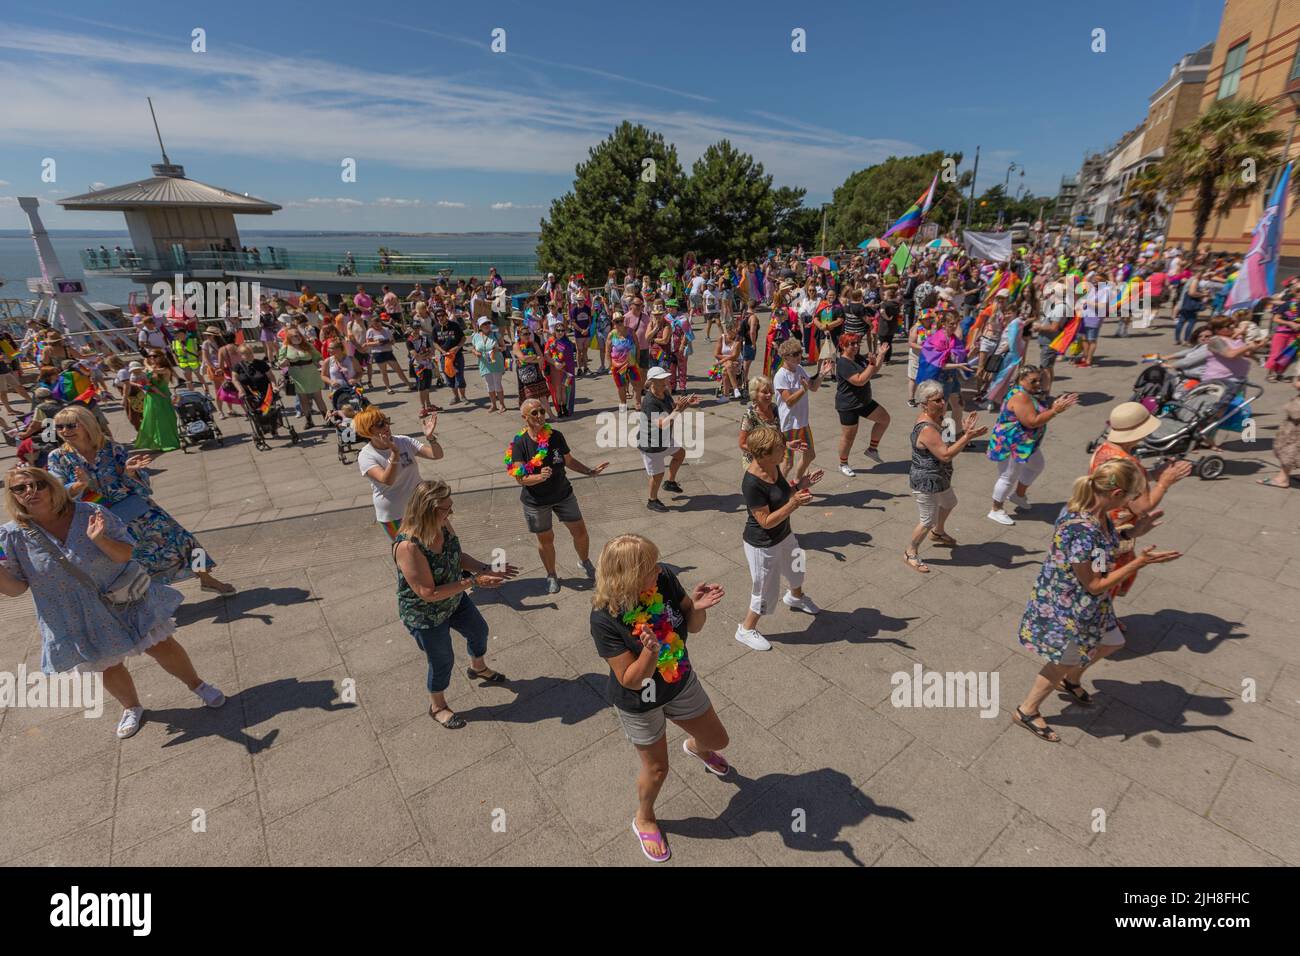 Southend on Sea, UK. 16th July, 2022. 1000s of participants gather for Southend Pride event, before the parade sets off along the High Street and into Warrior Square Gardens for a Pride Festival featuring live entertainment. Penelope Barritt/Alamy Live News Stock Photo